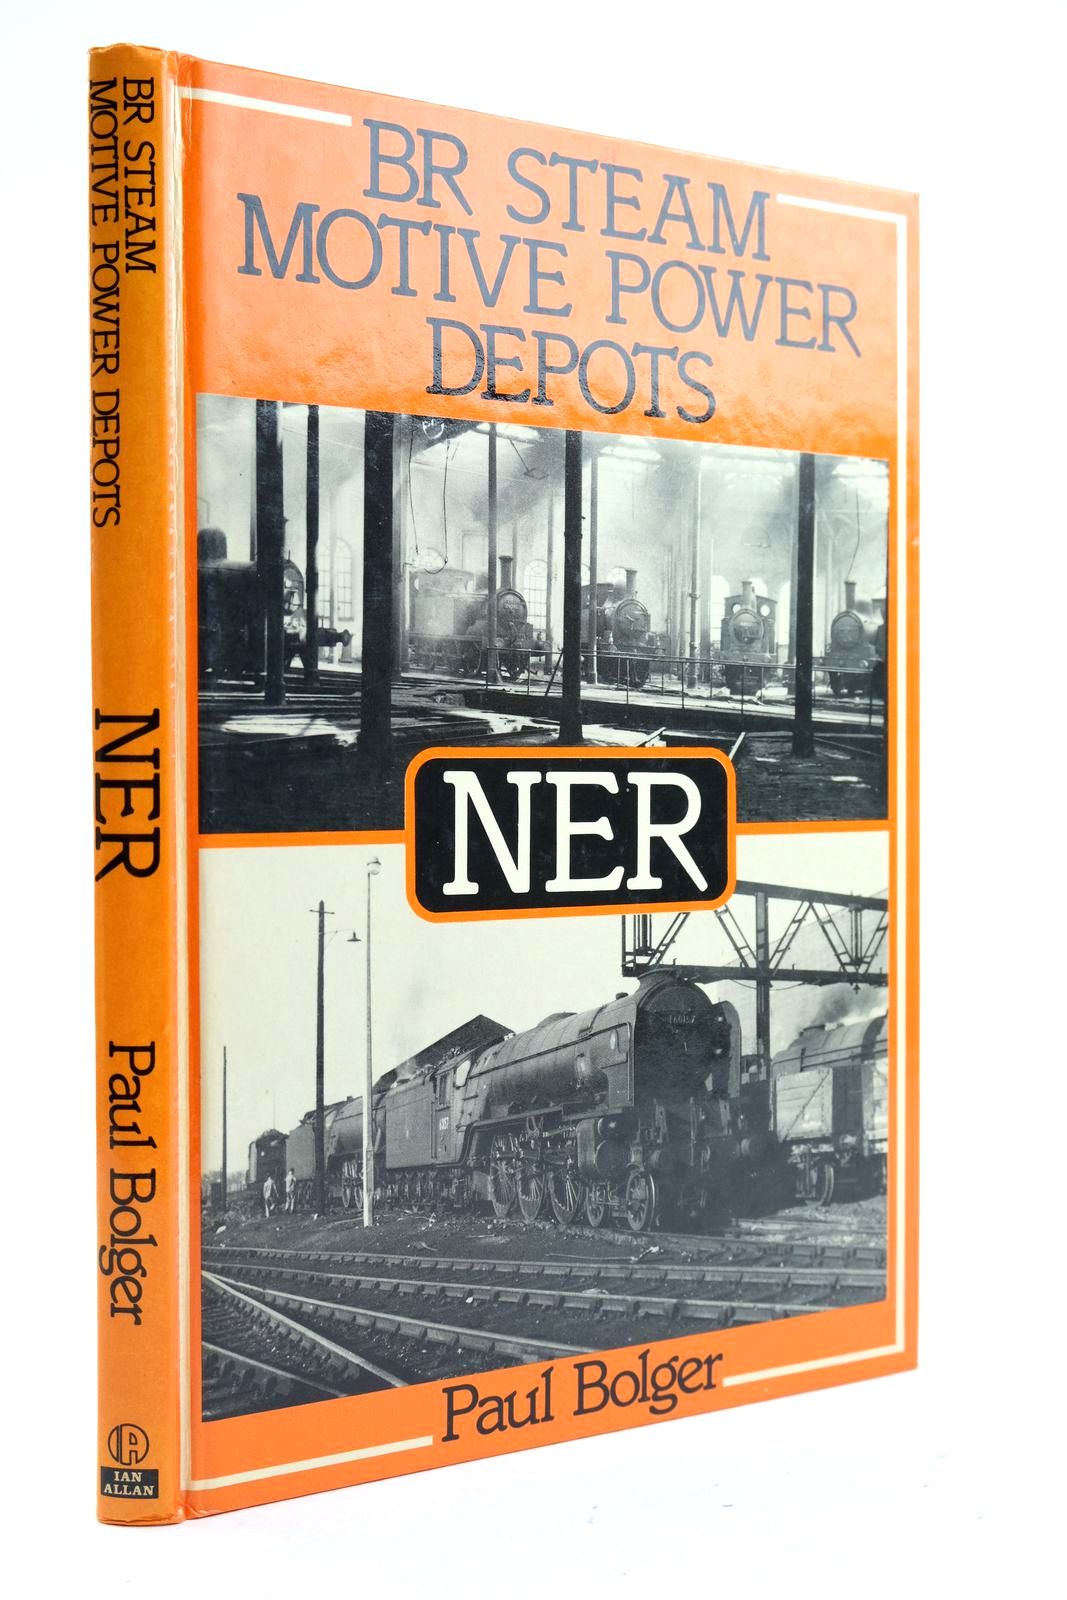 Photo of BR STEAM MOTIVE POWER DEPOTS NER written by Bolger, Paul published by Ian Allan (STOCK CODE: 2133023)  for sale by Stella & Rose's Books